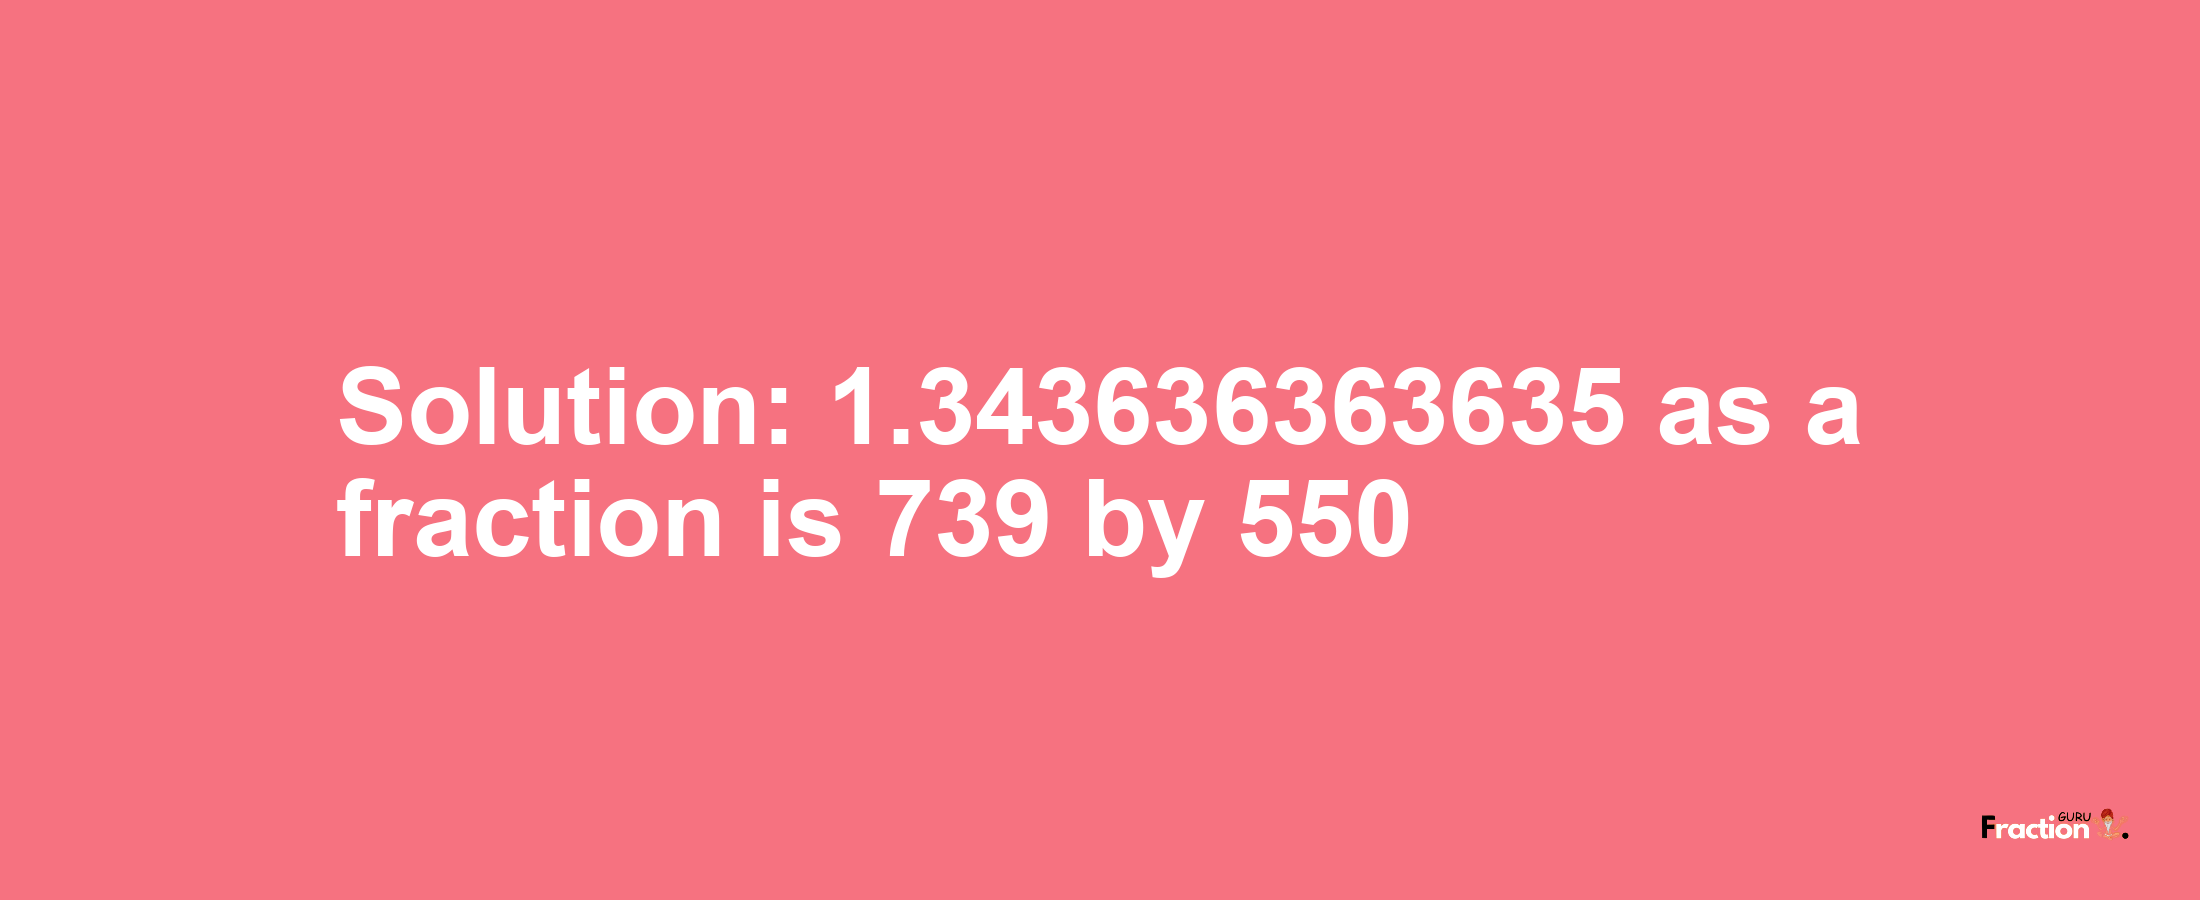 Solution:1.343636363635 as a fraction is 739/550